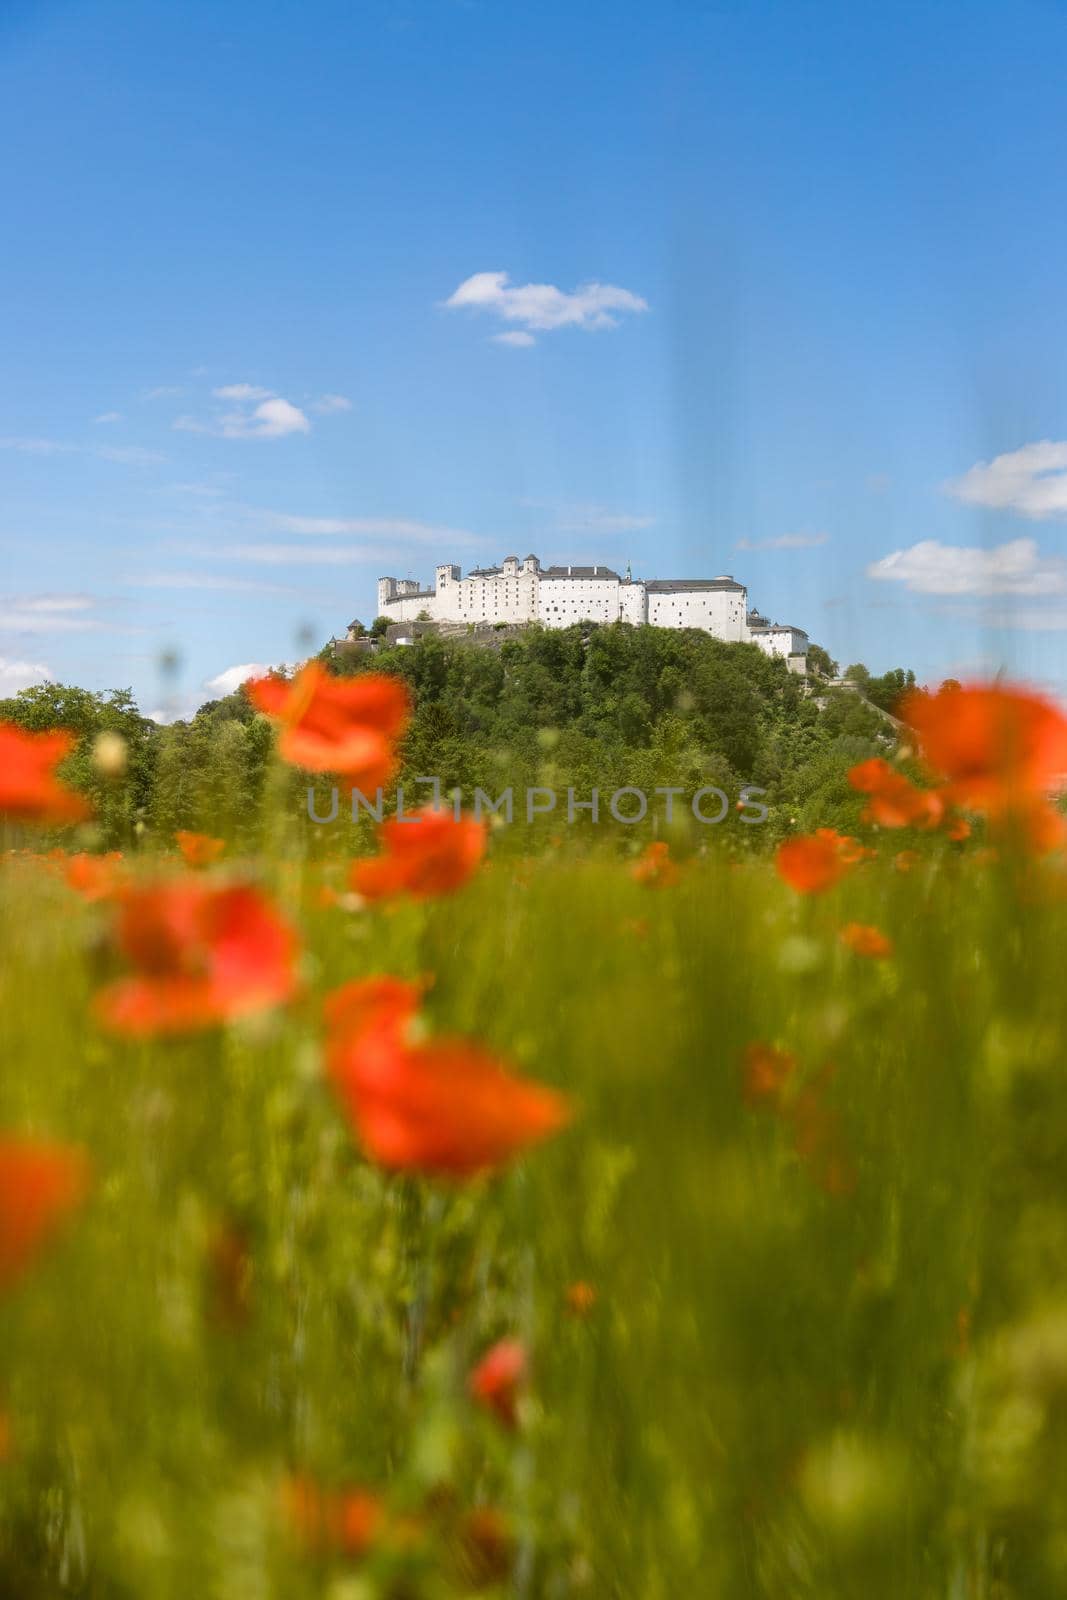 Festung Hohensalzburg in Summer. Blooming red poppy field and blue sky by Daxenbichler